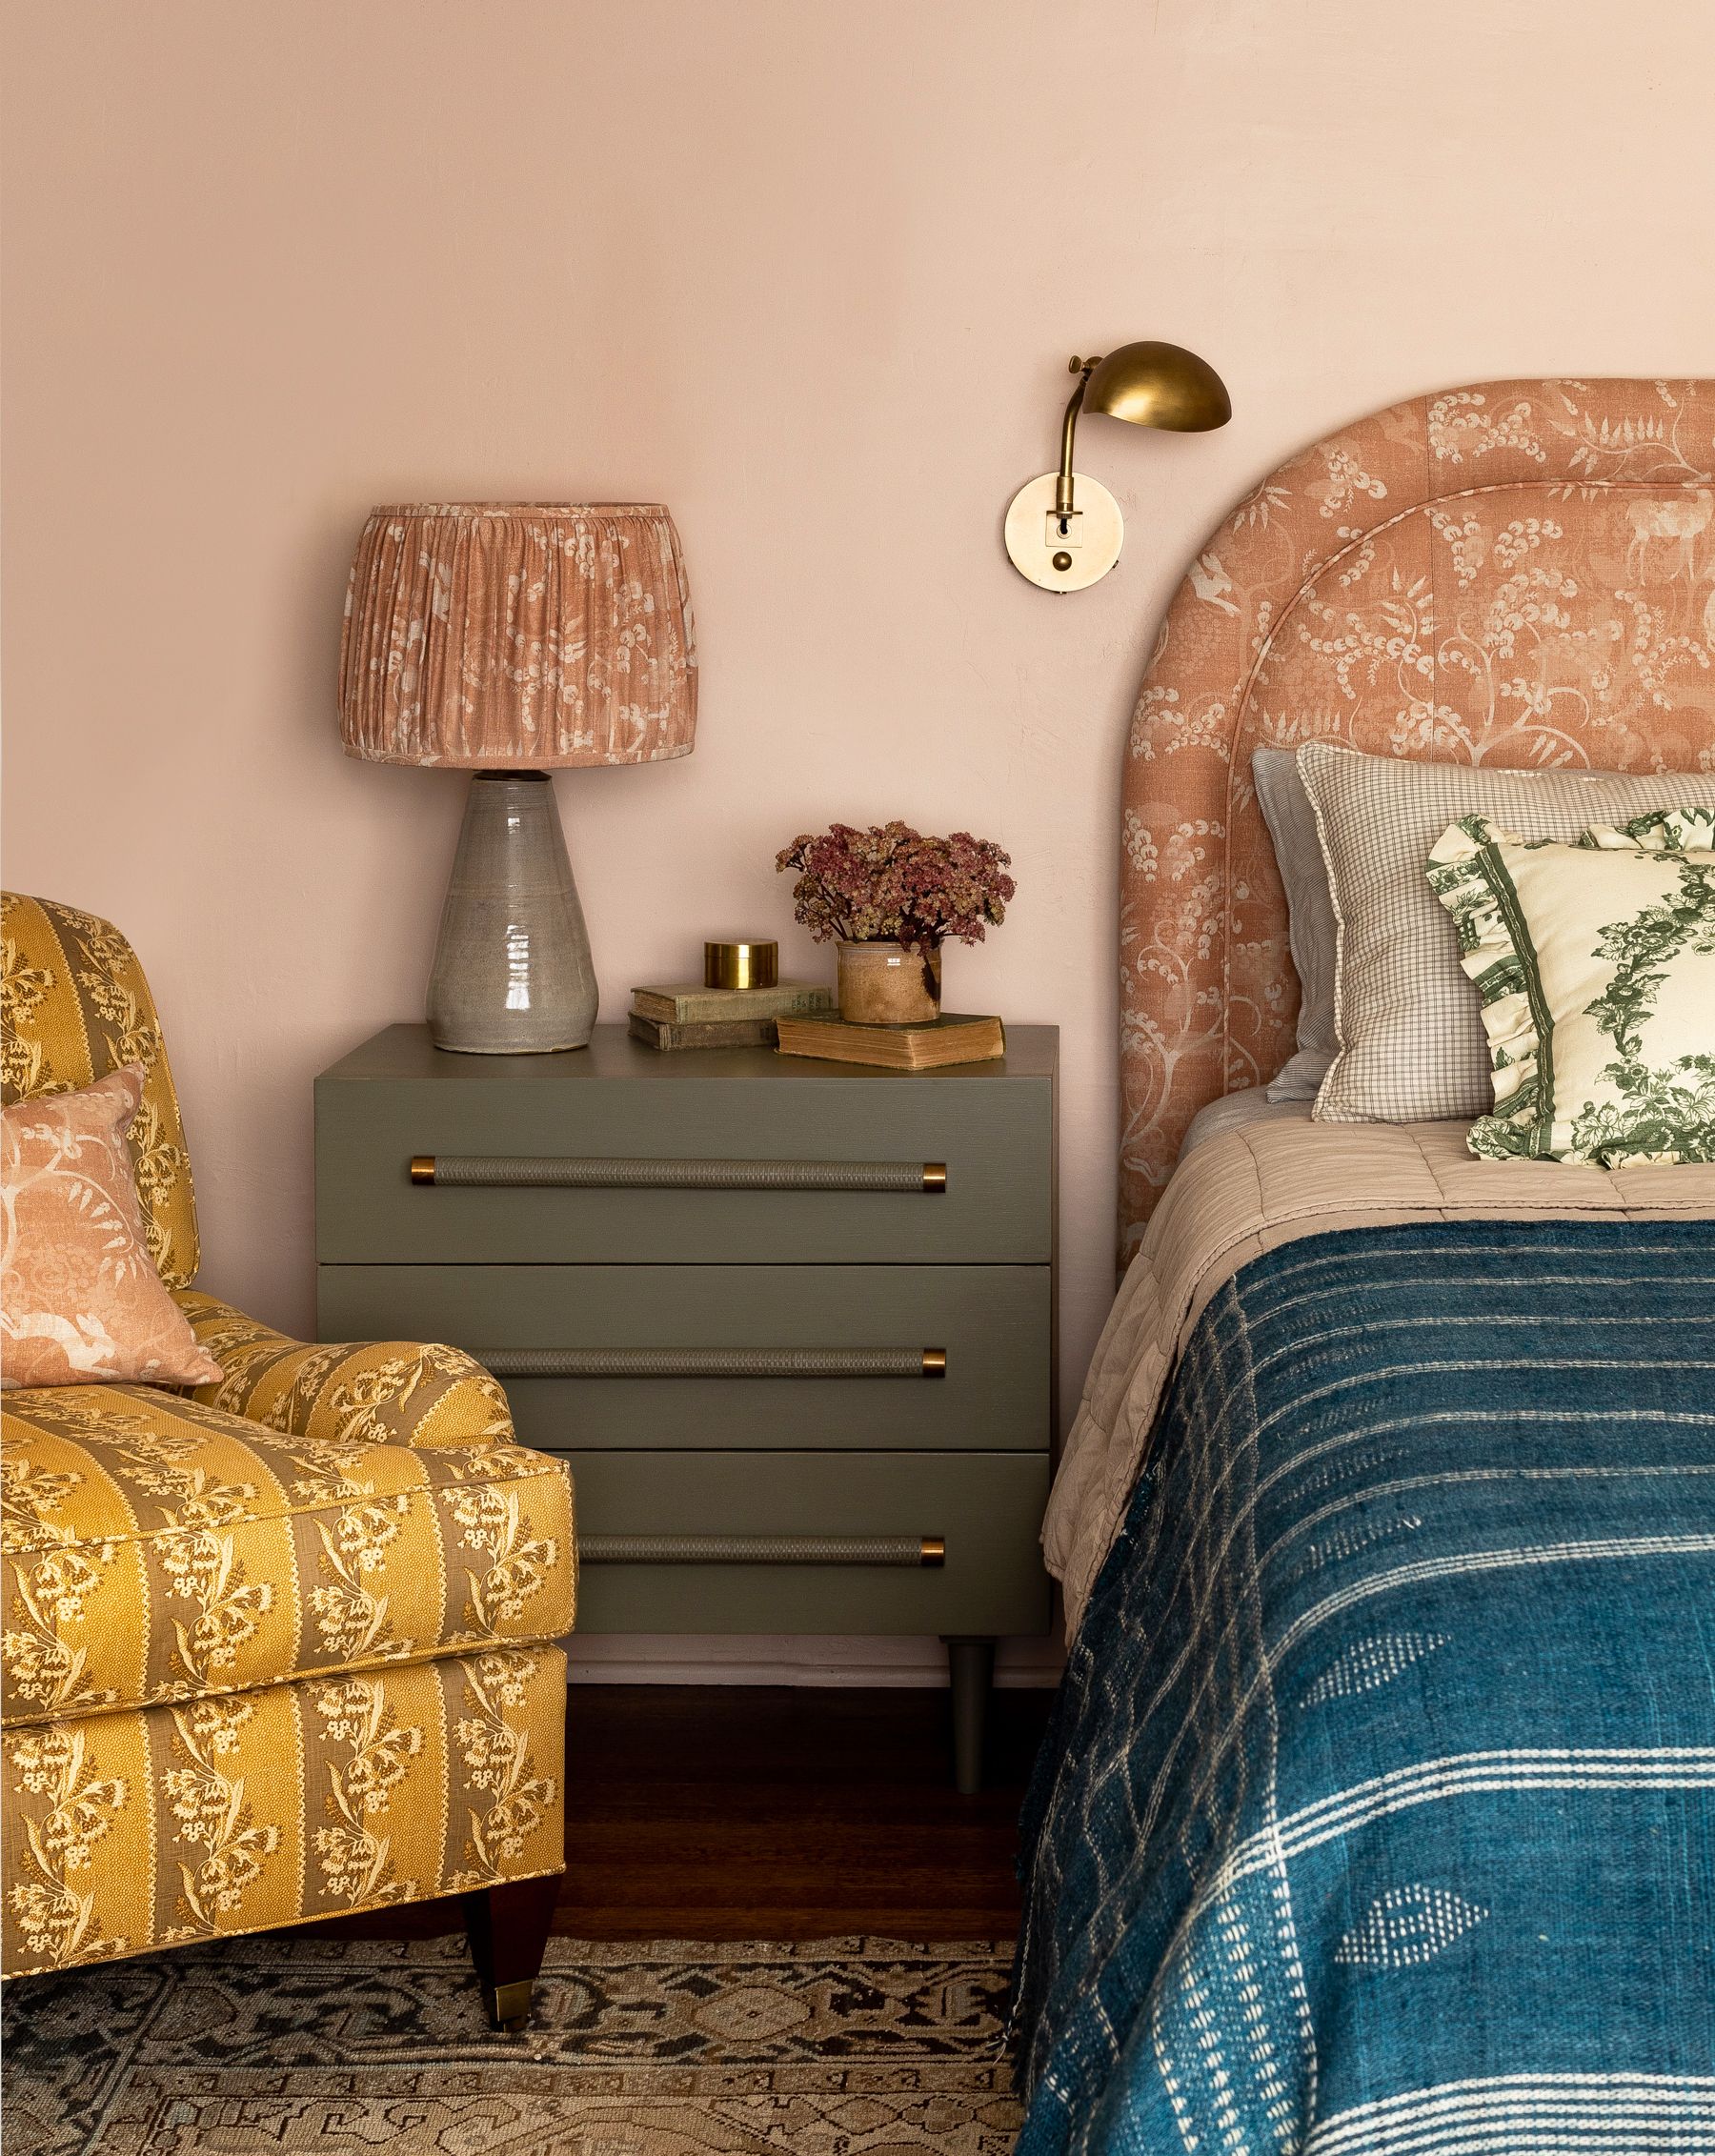 Alternative Bedside Table Ideas Heidi Caillier Design Seattle Interior Designer Pink Walls Master Bedroom Yellow Printed Chair Blue Blanket Bed British Layered Print Mixing 1572284573 